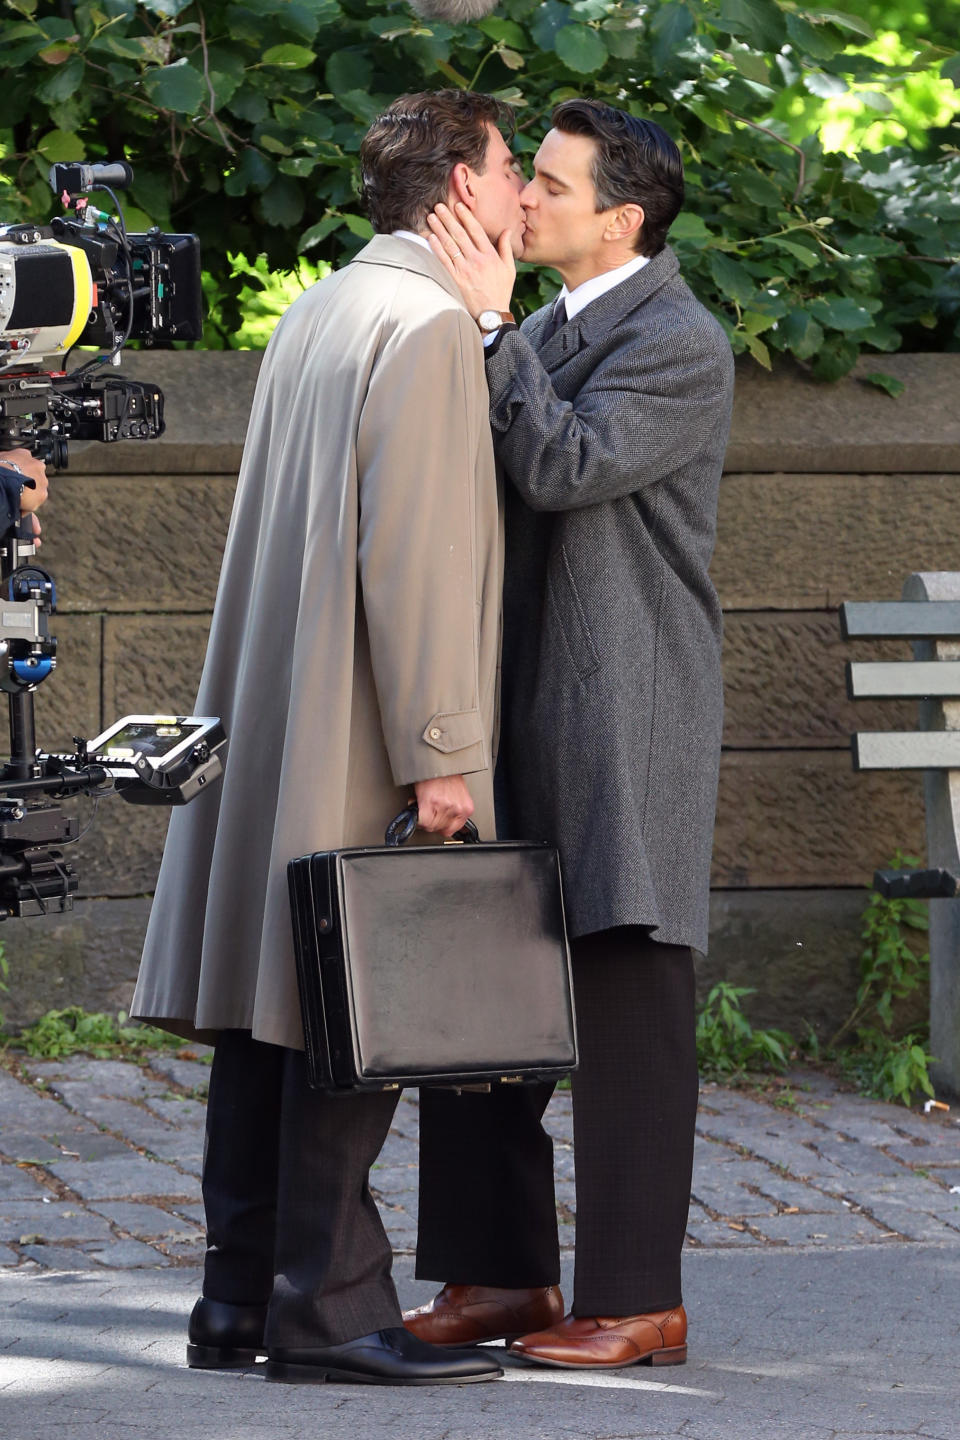 Matt holds Bradley's face as they kiss while standing on a sidewalk and Bradley holds a briefcase